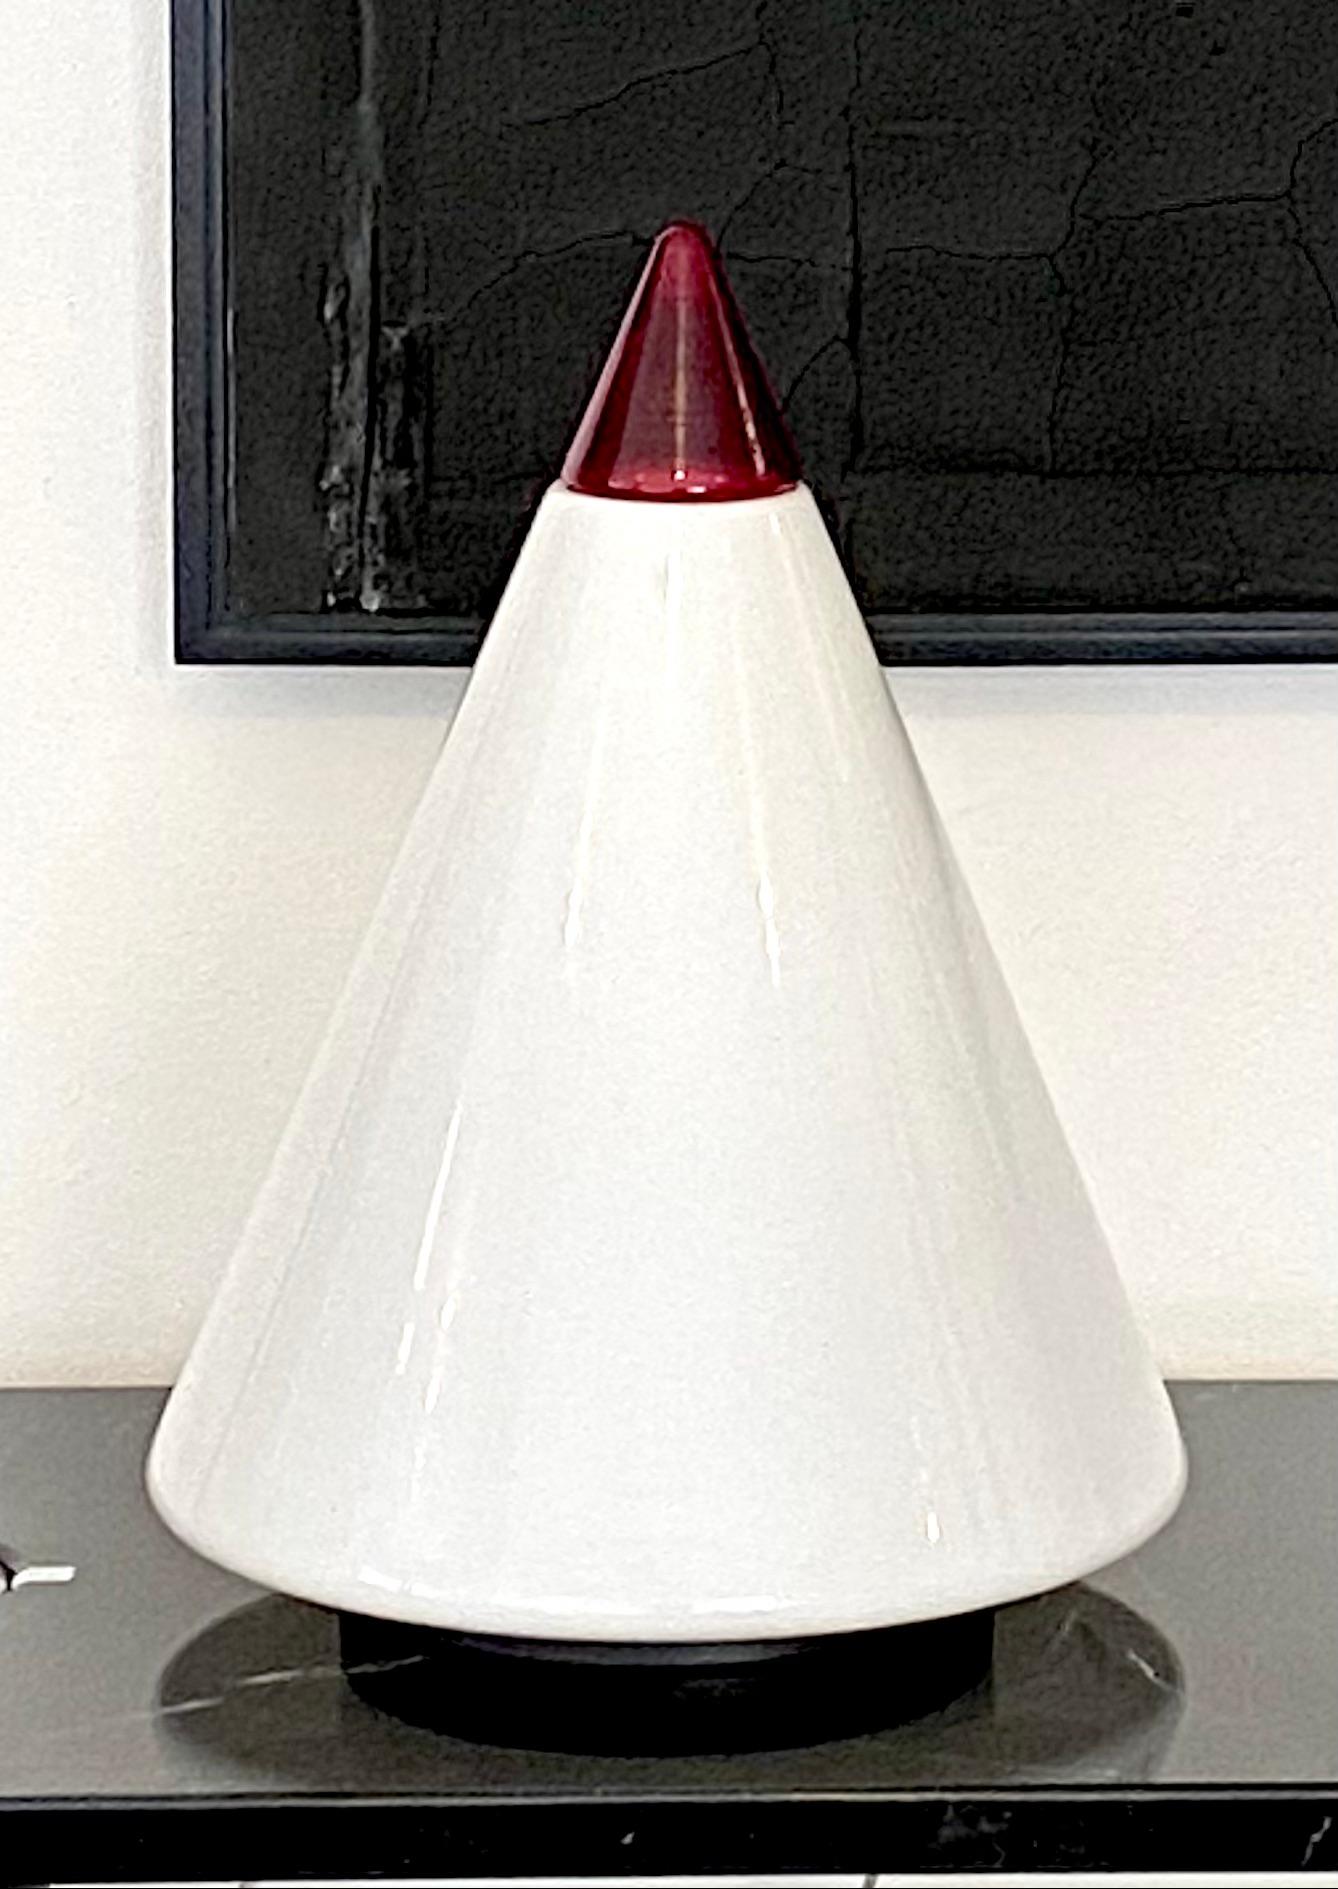 Large table lamp designed by Giusto Toso and manufactured by Leucos in 1977, white opaline and with red pyramid crystal terminating all made of Murano glass.
Excellent condition. Single bulb in the interior. The glass lifts off simply with no